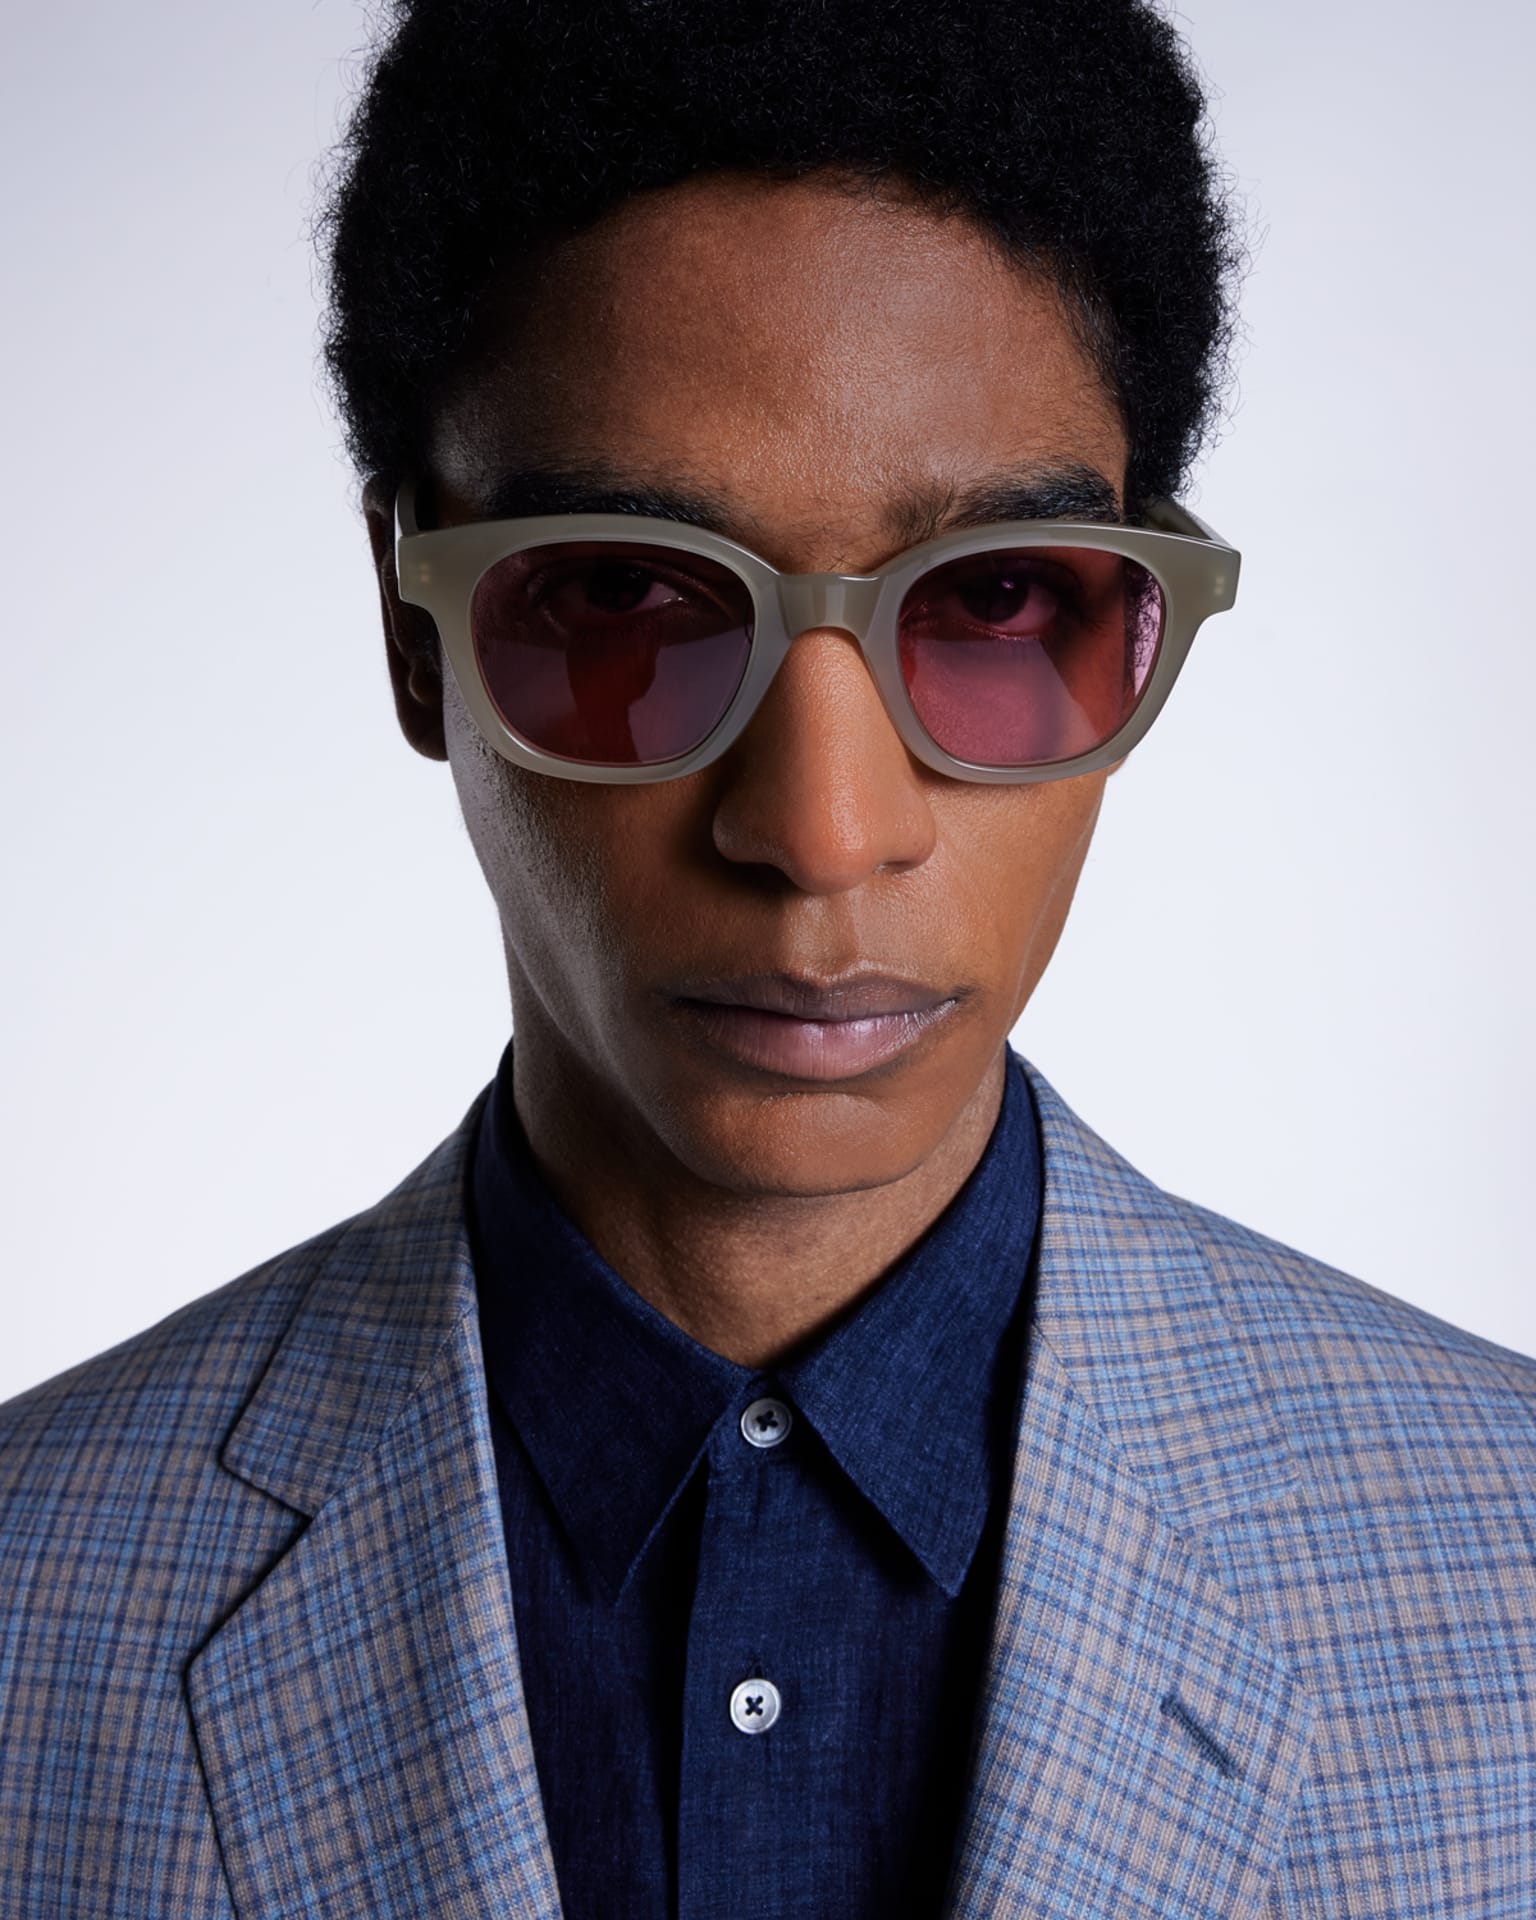 a headshot of a male model wearing a blue checked suit jacket and navy shirt, accessorising with light brown sunglasses with red tinted lenses